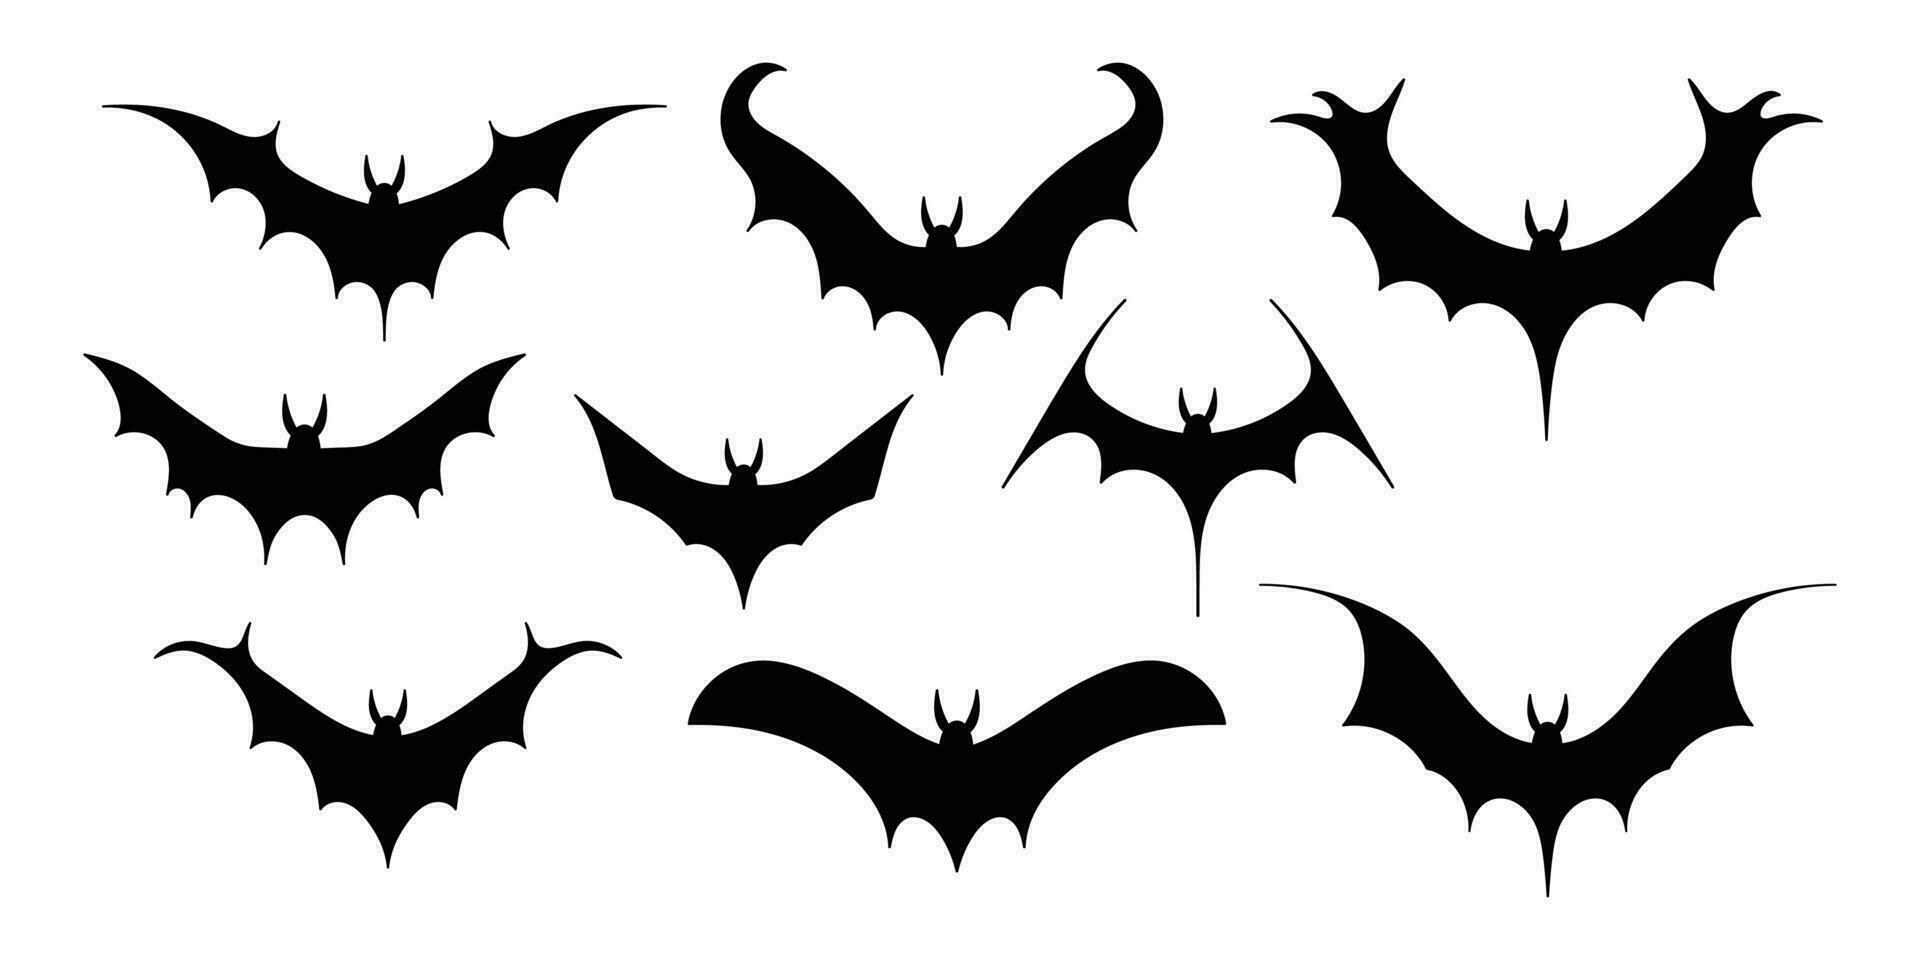 Bat silhouettes. Isolated black bats, vampire graphic symbols set. Terrible scary neat decorative stencil for cutting, vector bunch